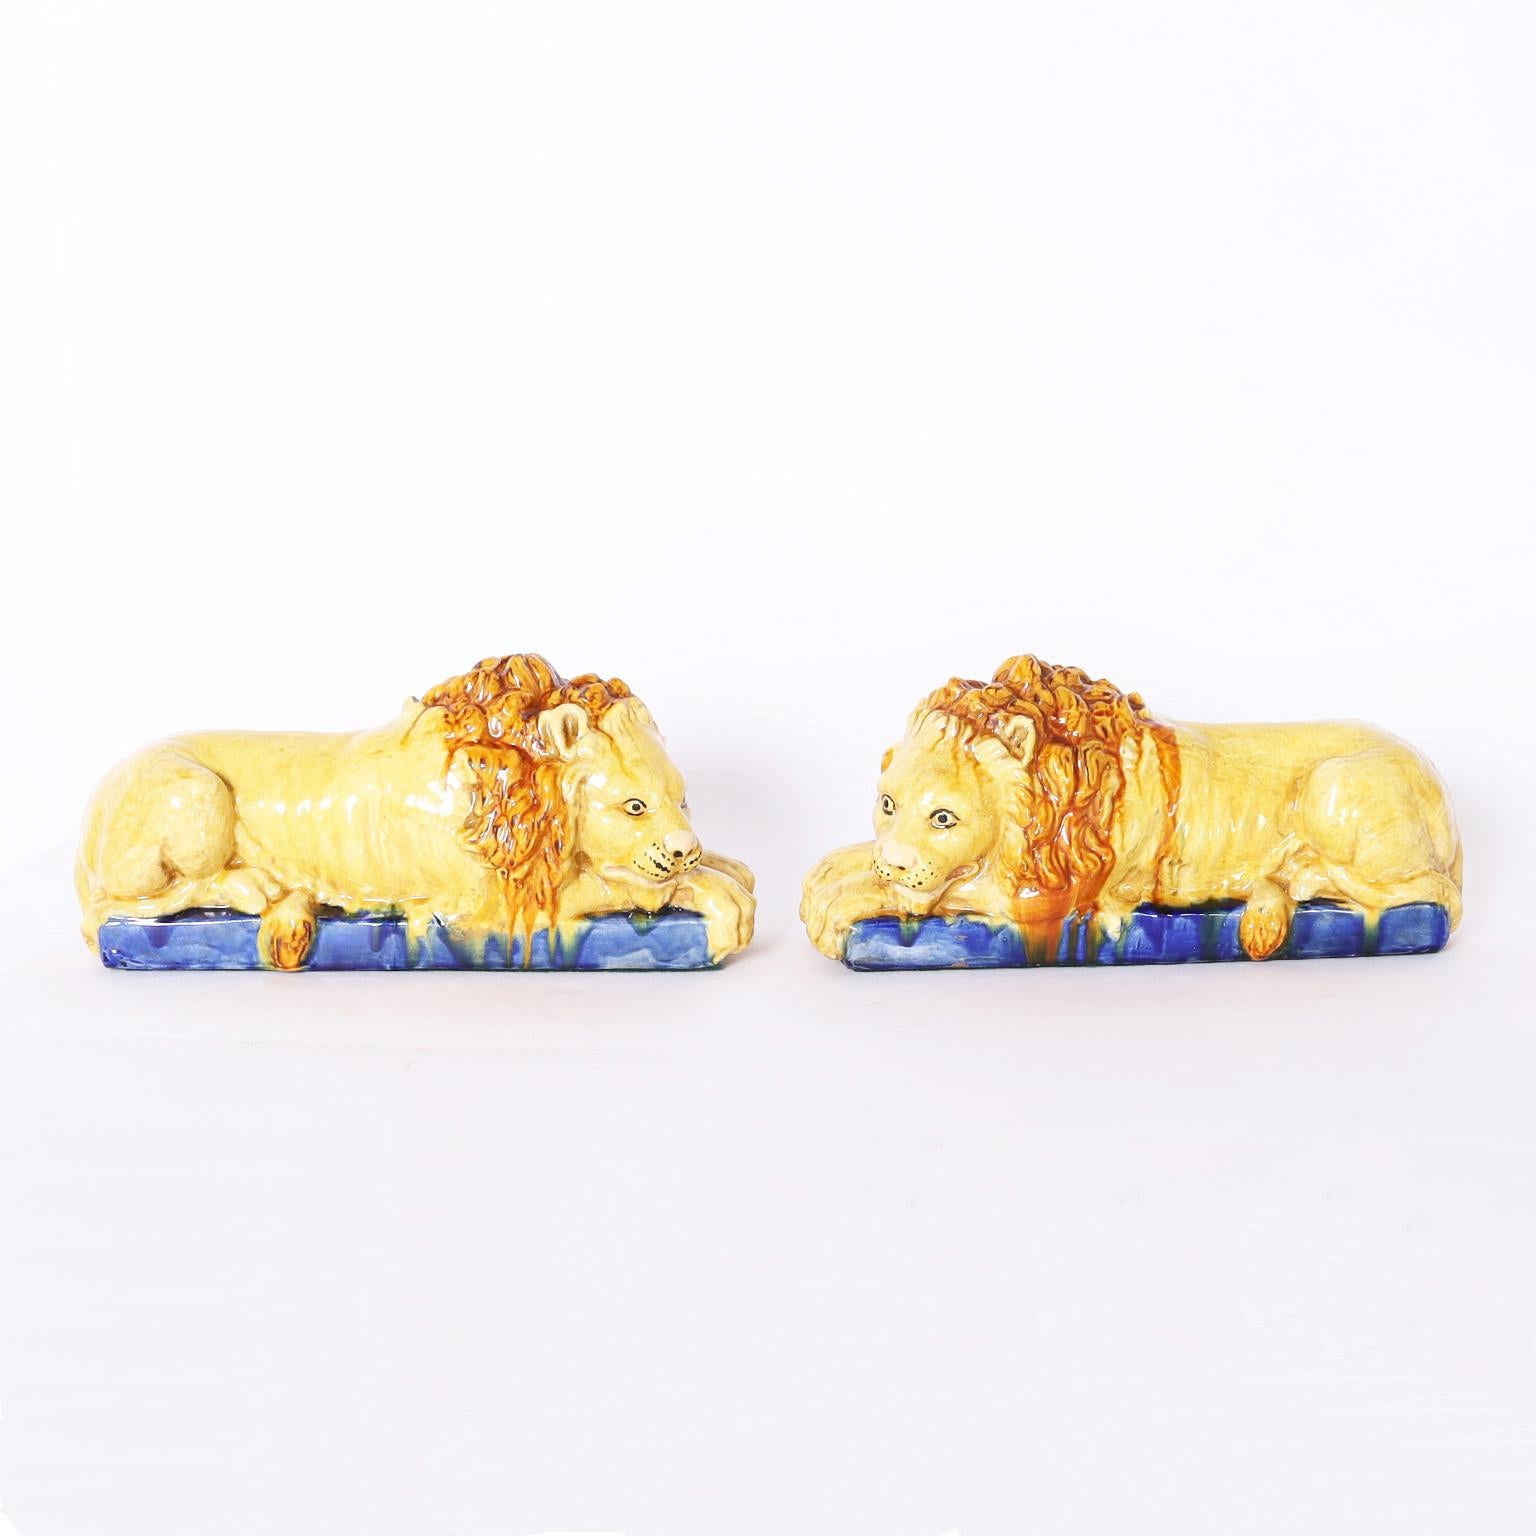 Antique Italian true pair of lions crafted in terra cotta, decorated, glazed and forever in repose.